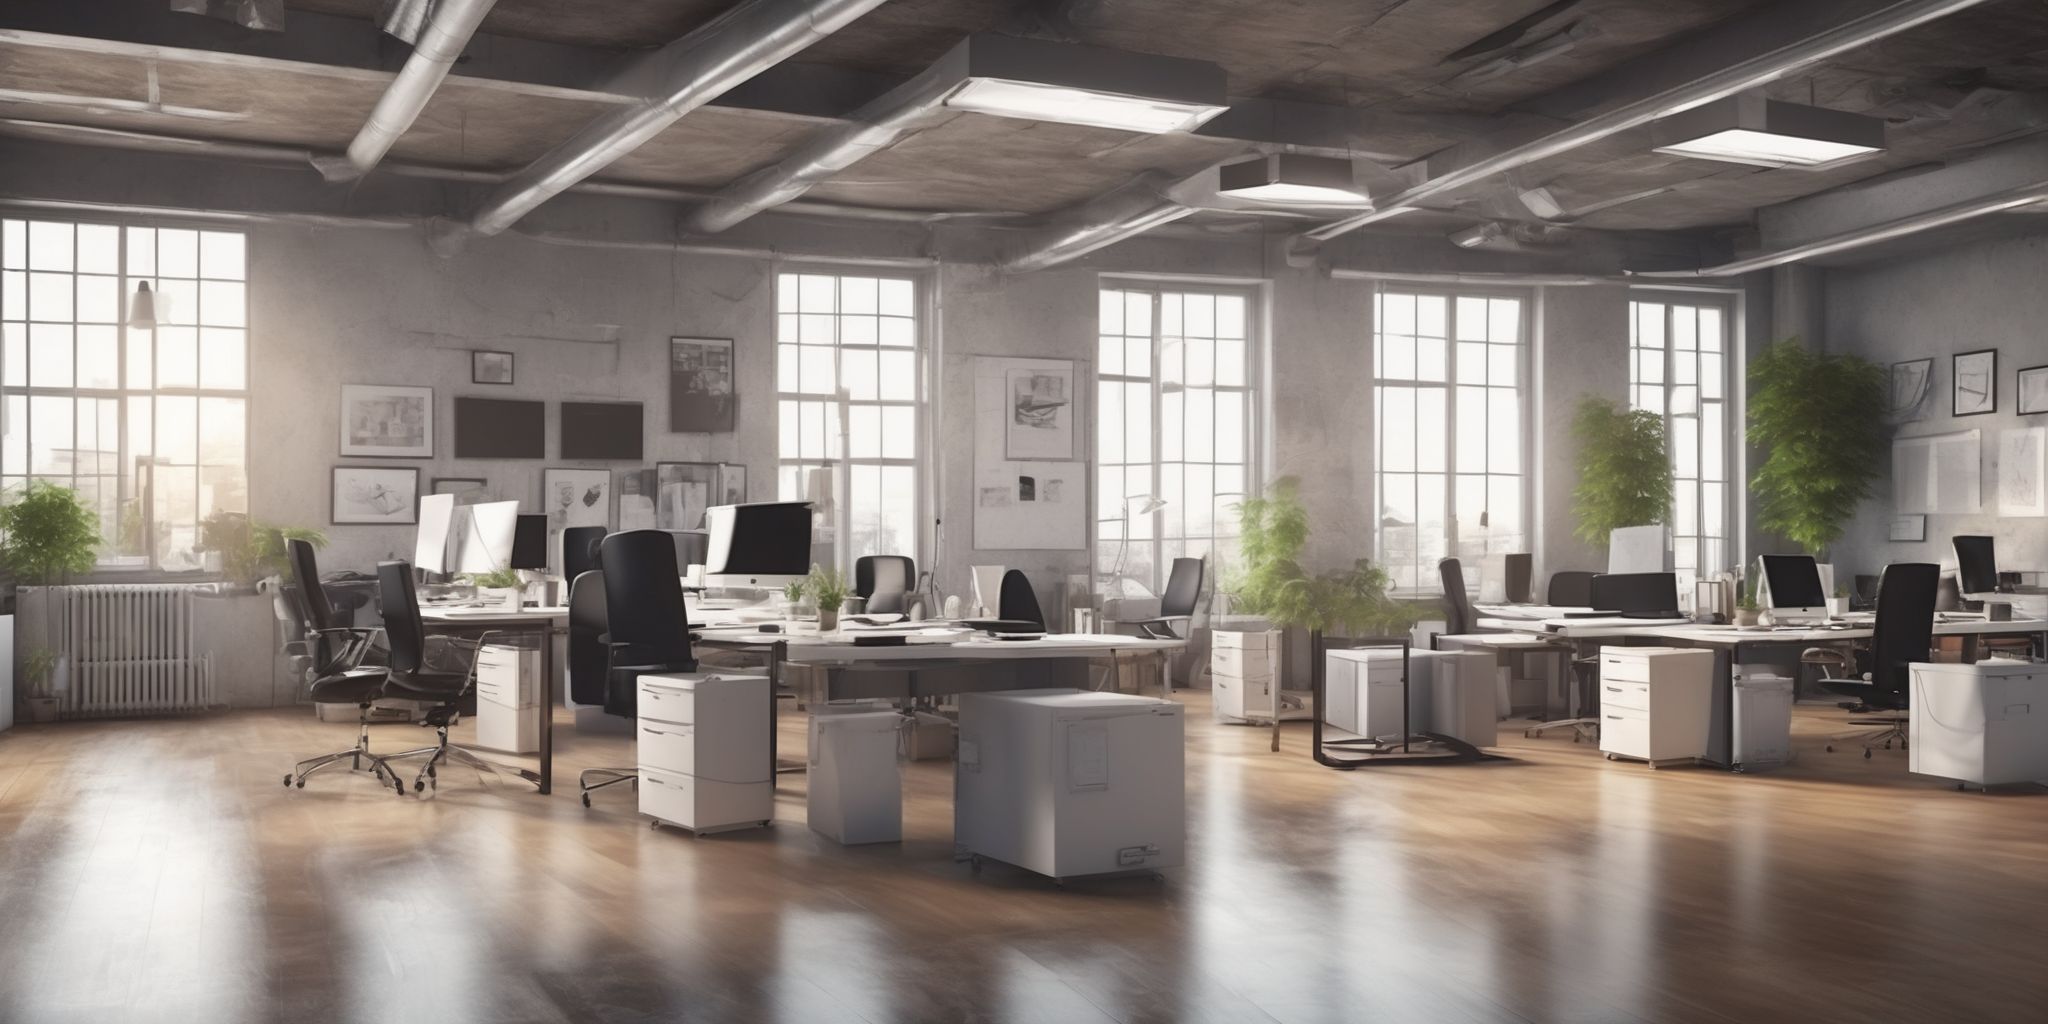 Office  in realistic, photographic style